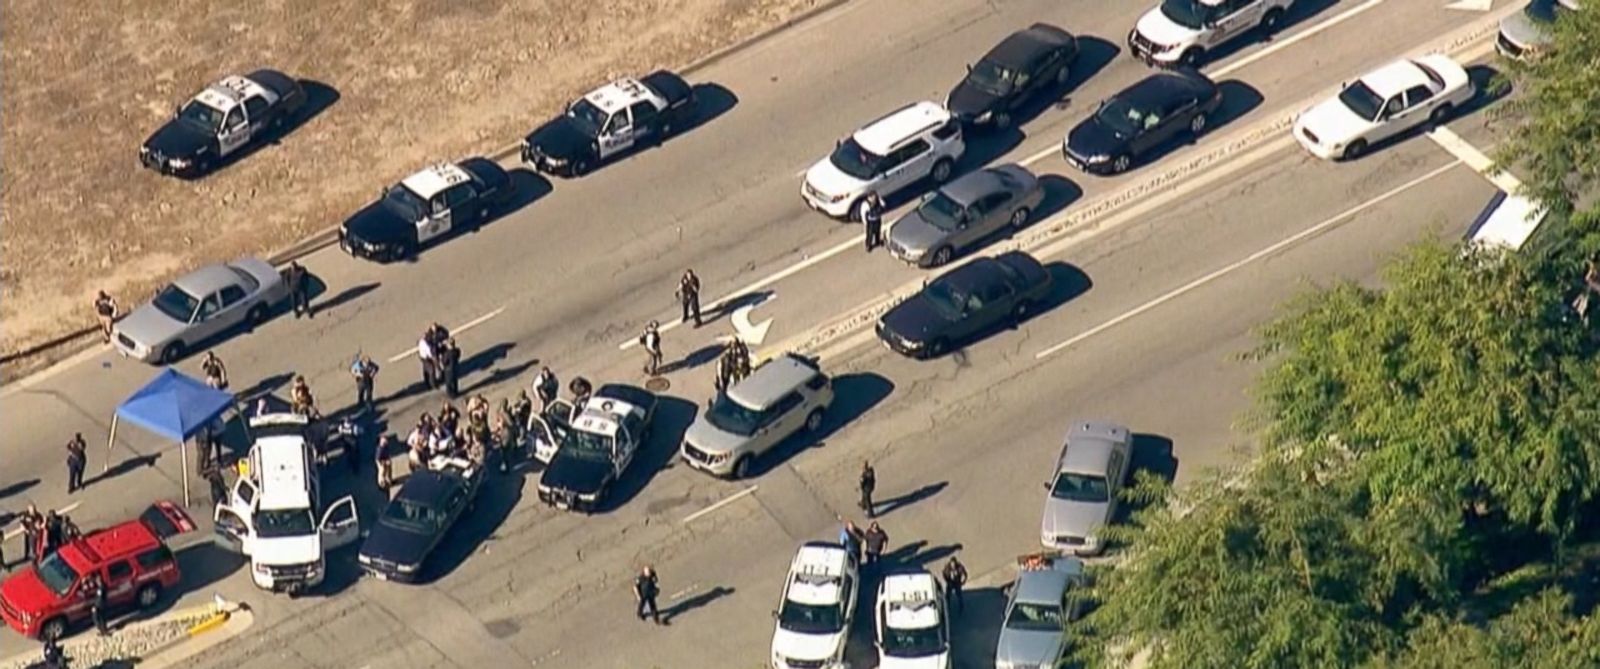 PHOTO: A scene from an alleged shooting situation in San Bernardino, Calif., Dec. 2, 2015.